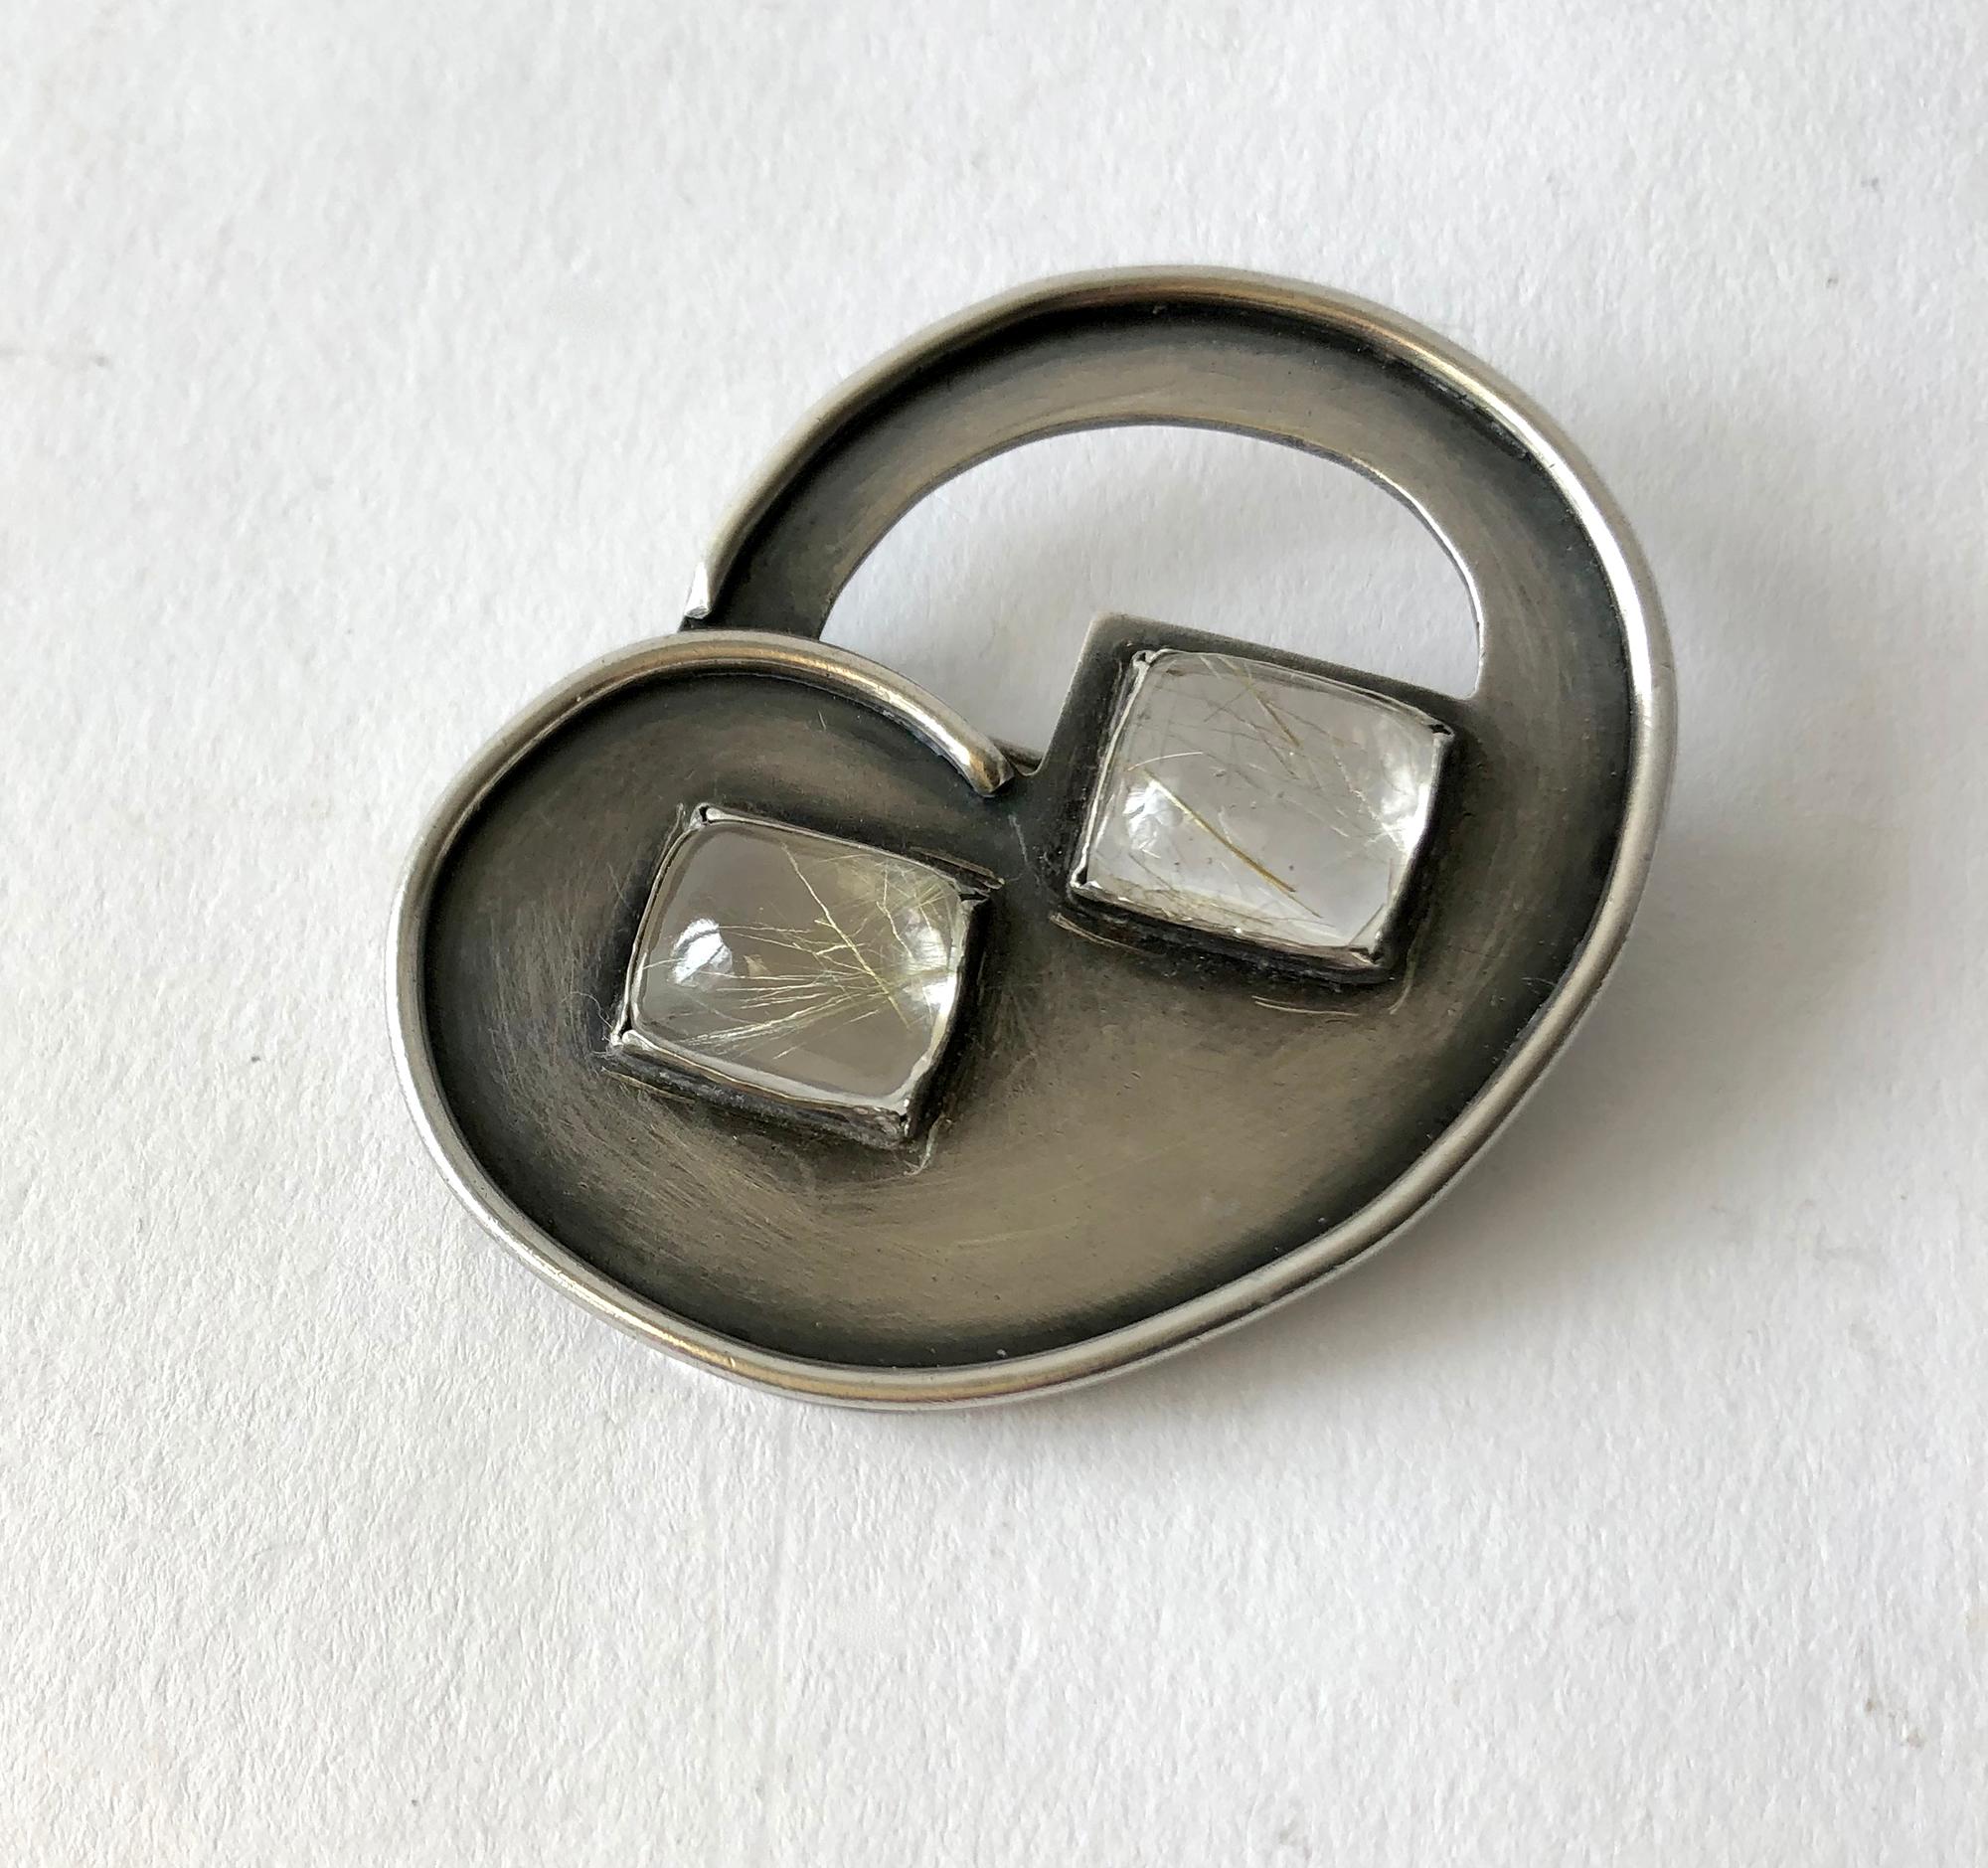 Modernist sterling silver and rutilated quartz brooch created by enamelist and jeweler, Hilda Kraus.  Brooch measures 1 3/4